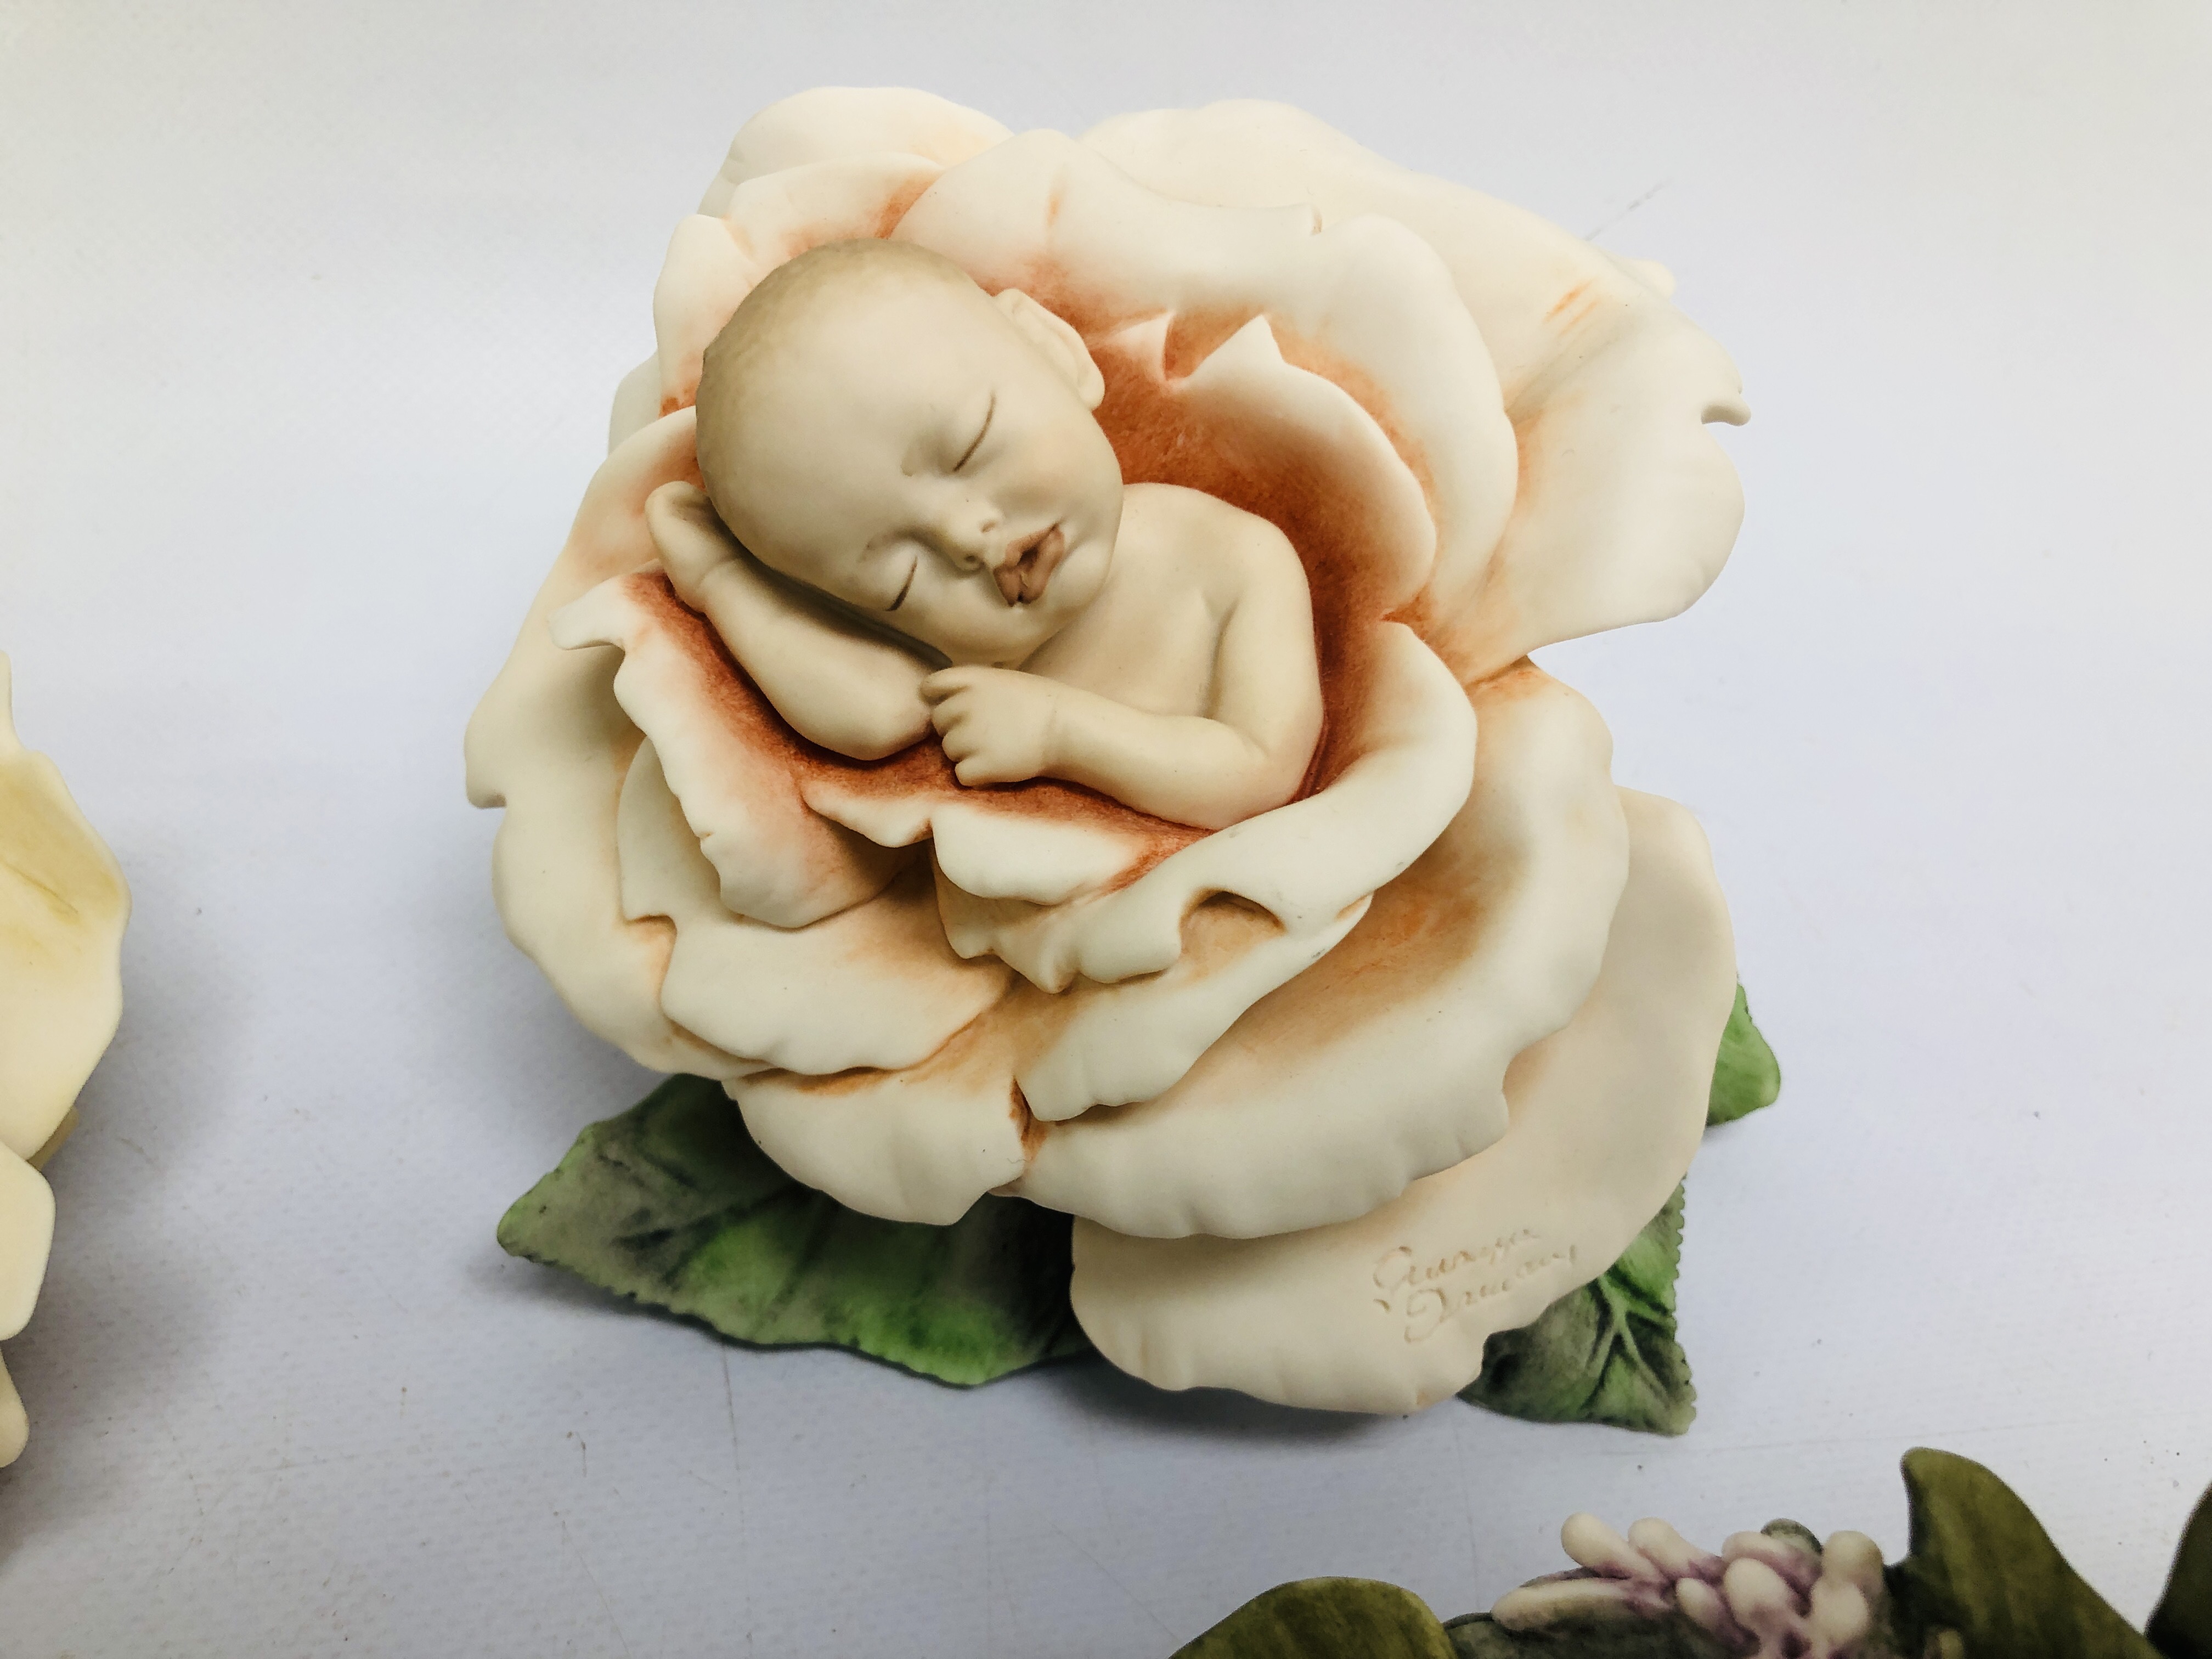 6 BOXED FLORENCE SLEEPING BABY FIGURES TO INCLUDE WATER LILY BABY, ROSE BABY, DAISY BABY, - Image 7 of 8